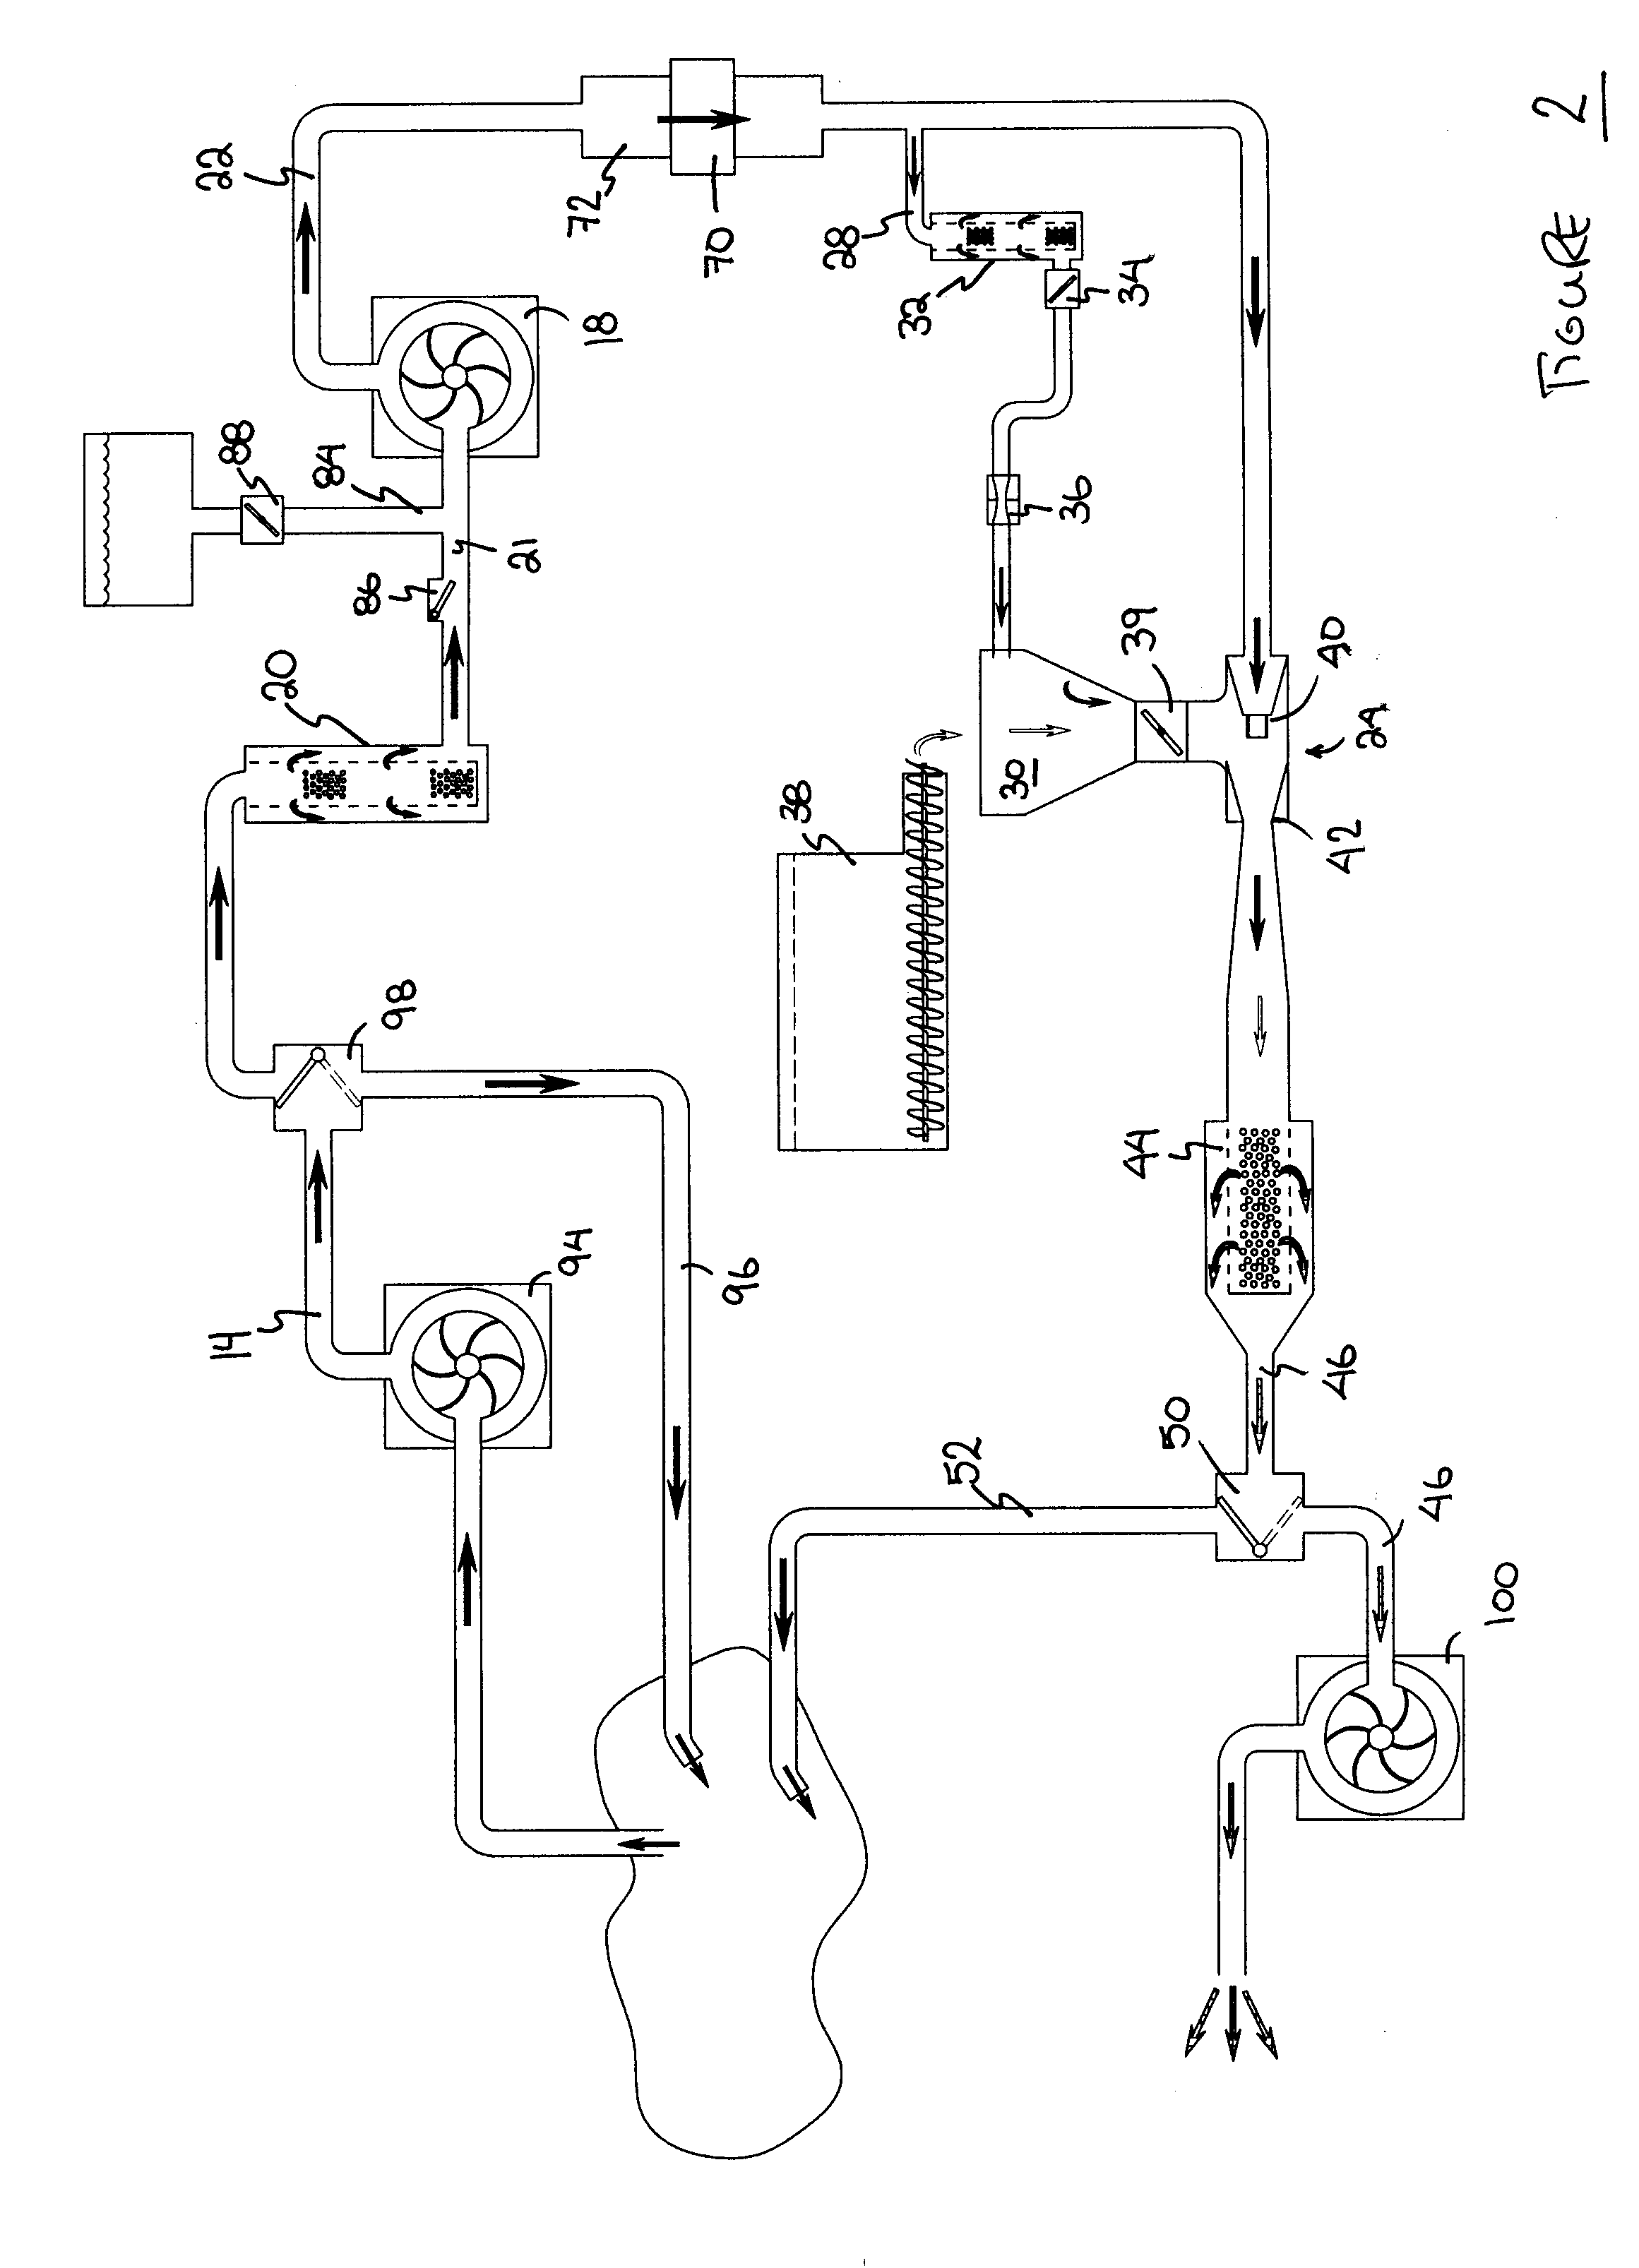 Apparatus for the incorporation of a dry treatment product into a liquid waste